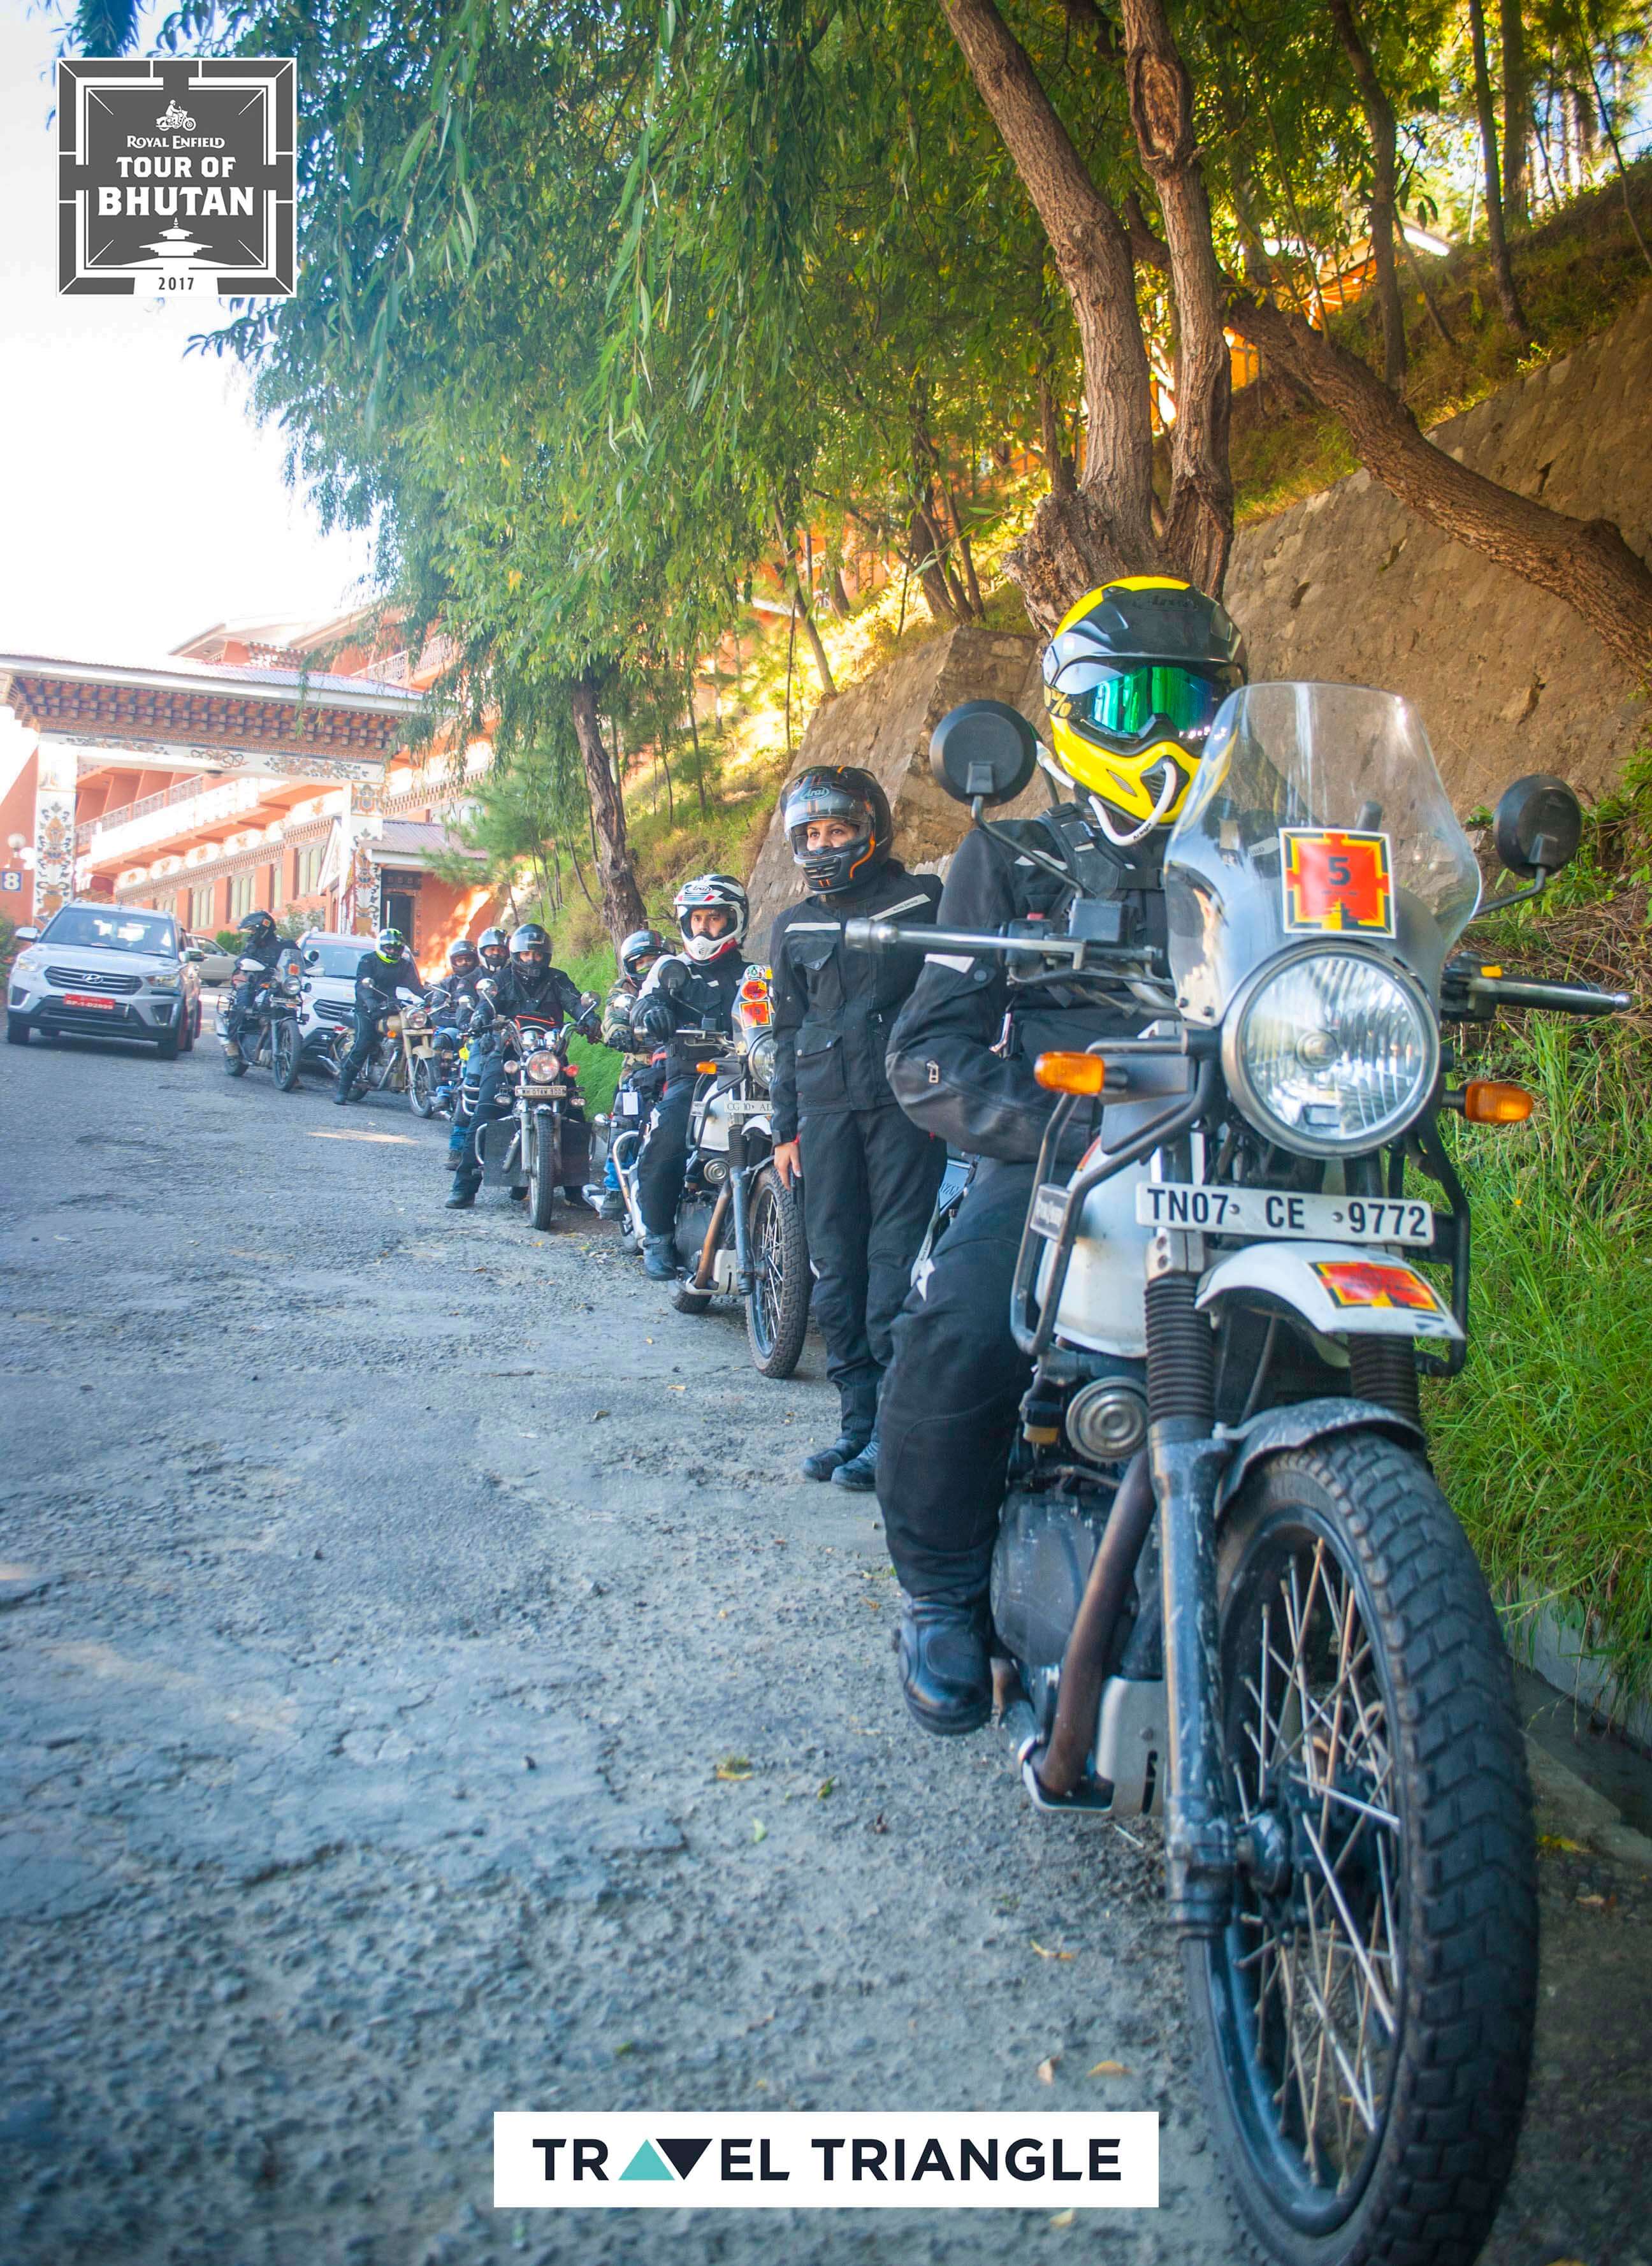 royal enfield india bhutan road trip: the entire group in formation